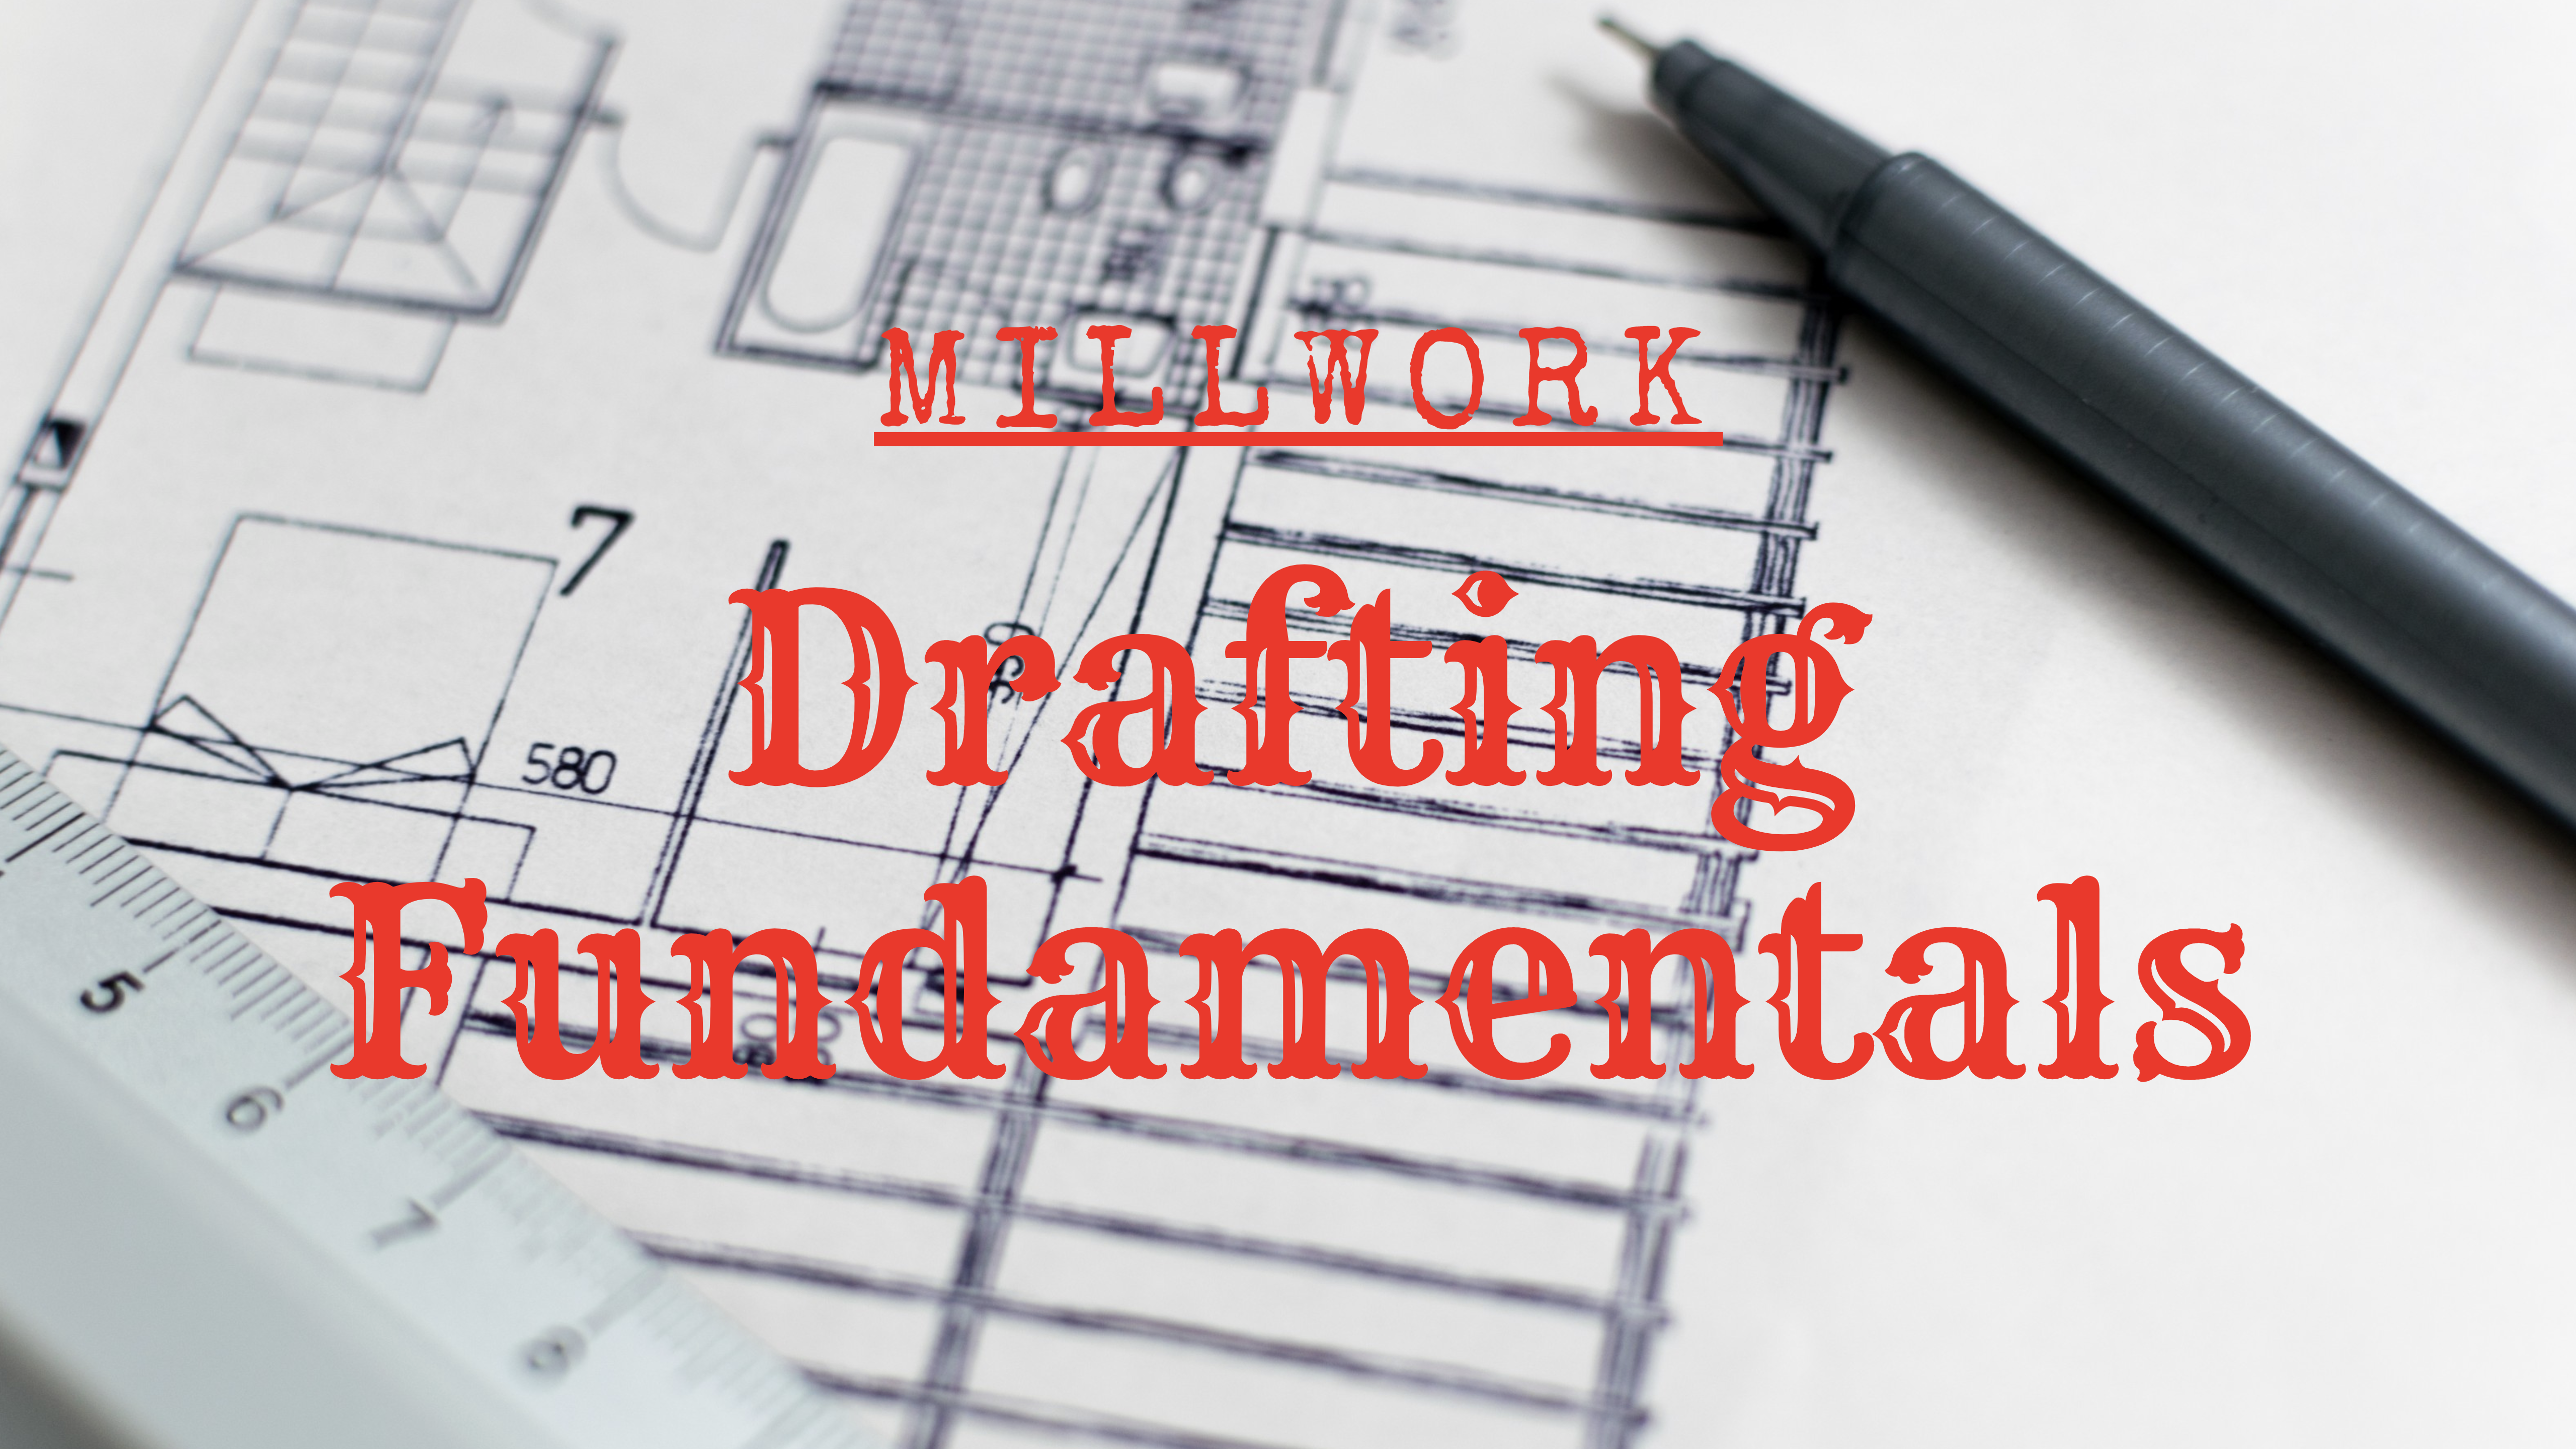 Superior Shop Drawings - Learn Millwork Drafting Fundamentals